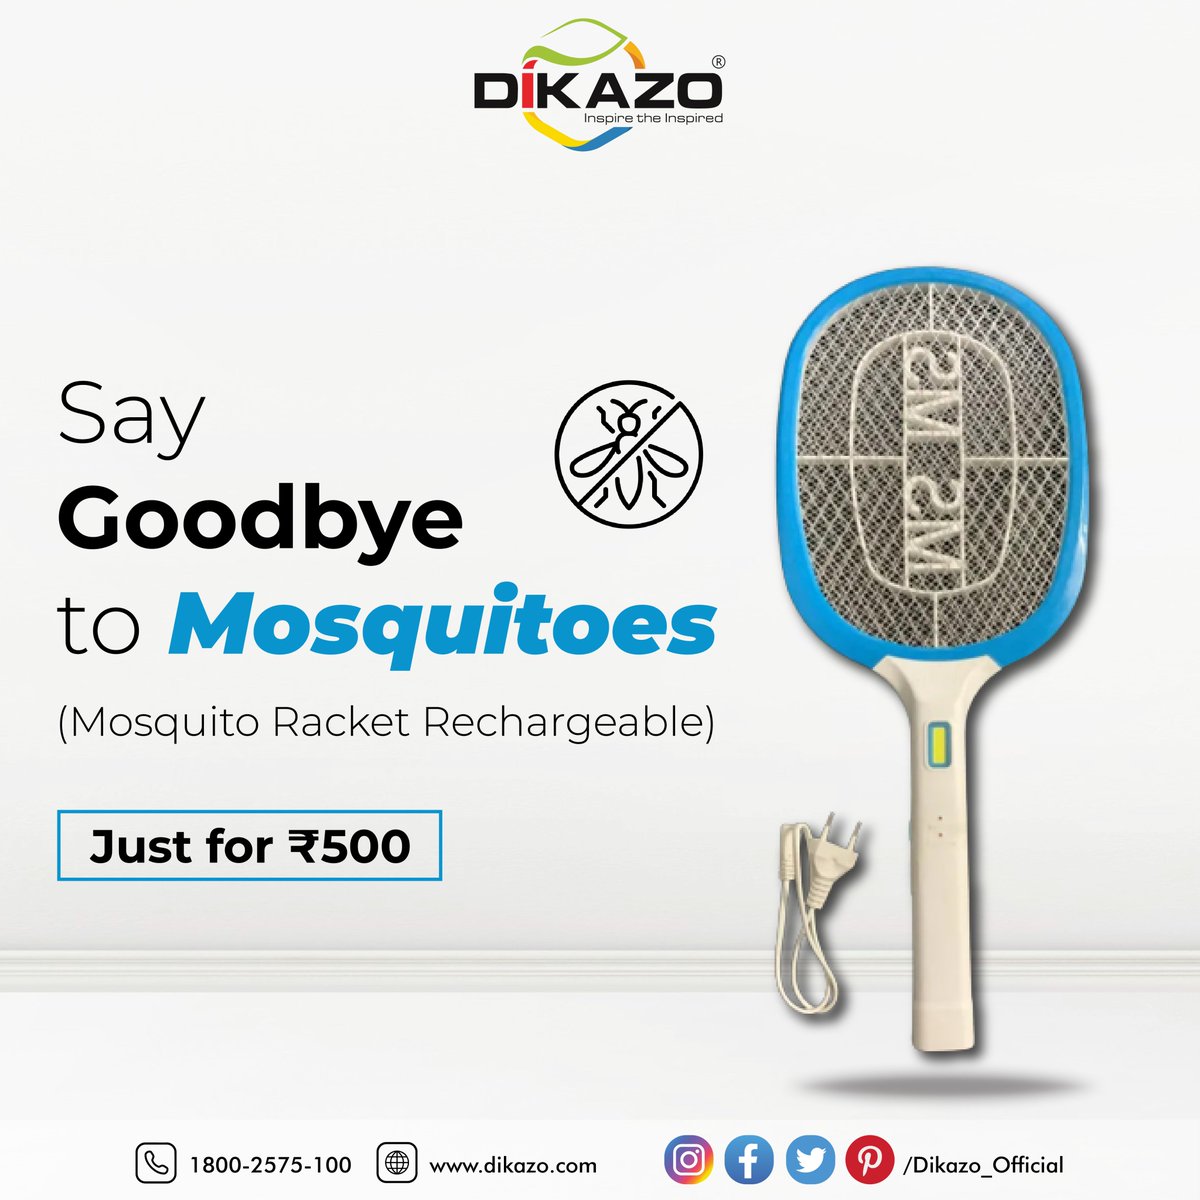 Keep your space mosquito-free with the Rechargeable Mosquito Racket in White, offering efficient bug zapping without the need for batteries. #MosquitoRacket #RechargeableBugZapper 
visit- dikazo.com/product/mosqui…